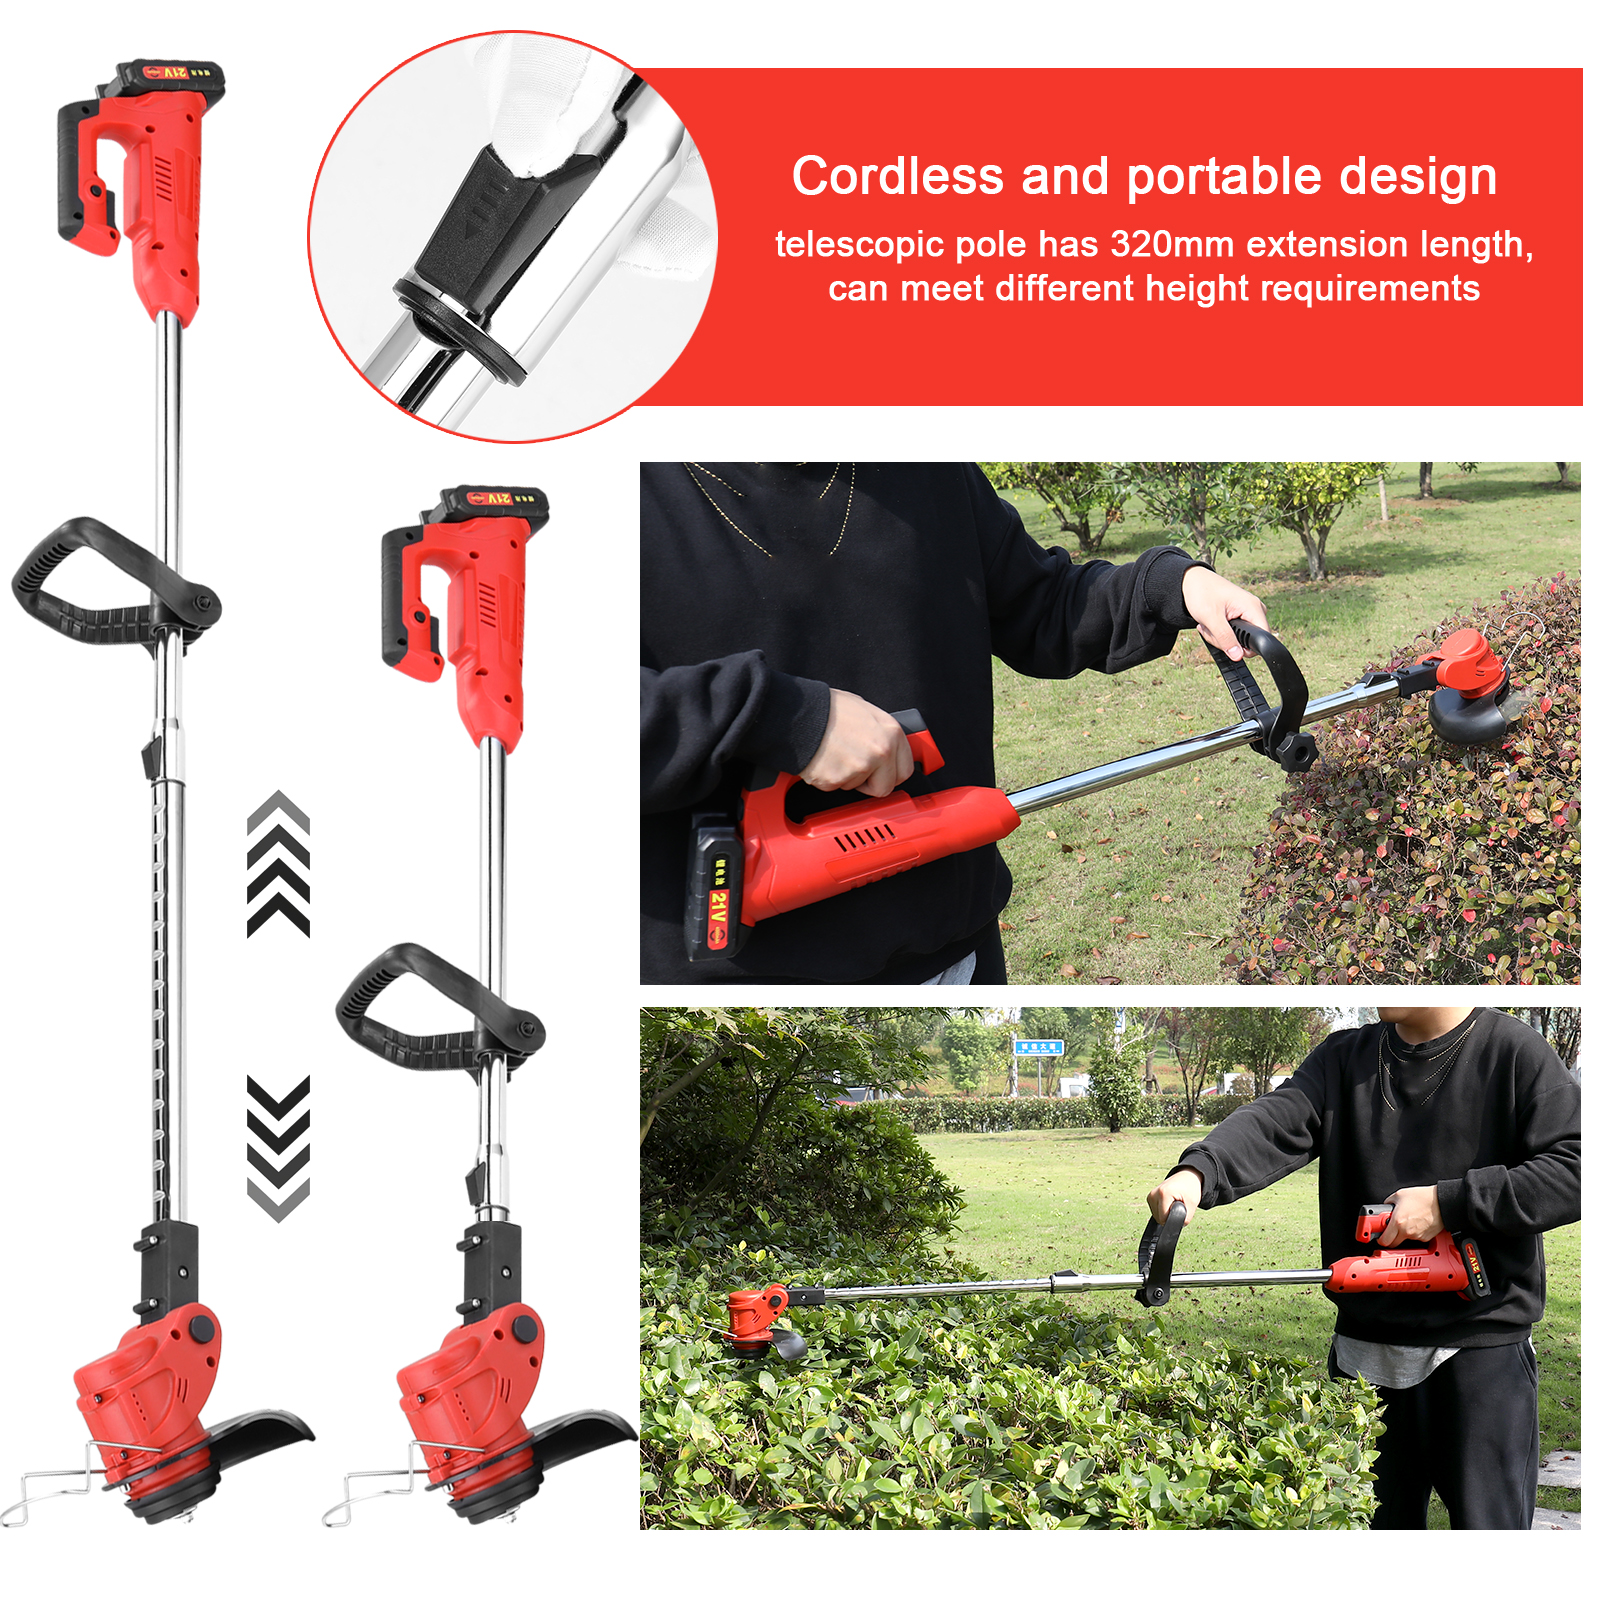 21V Electric Lawn Mower Cordless Household Grass Cutter Trimmer Brush Cutter Portable Pruning Garden Tool